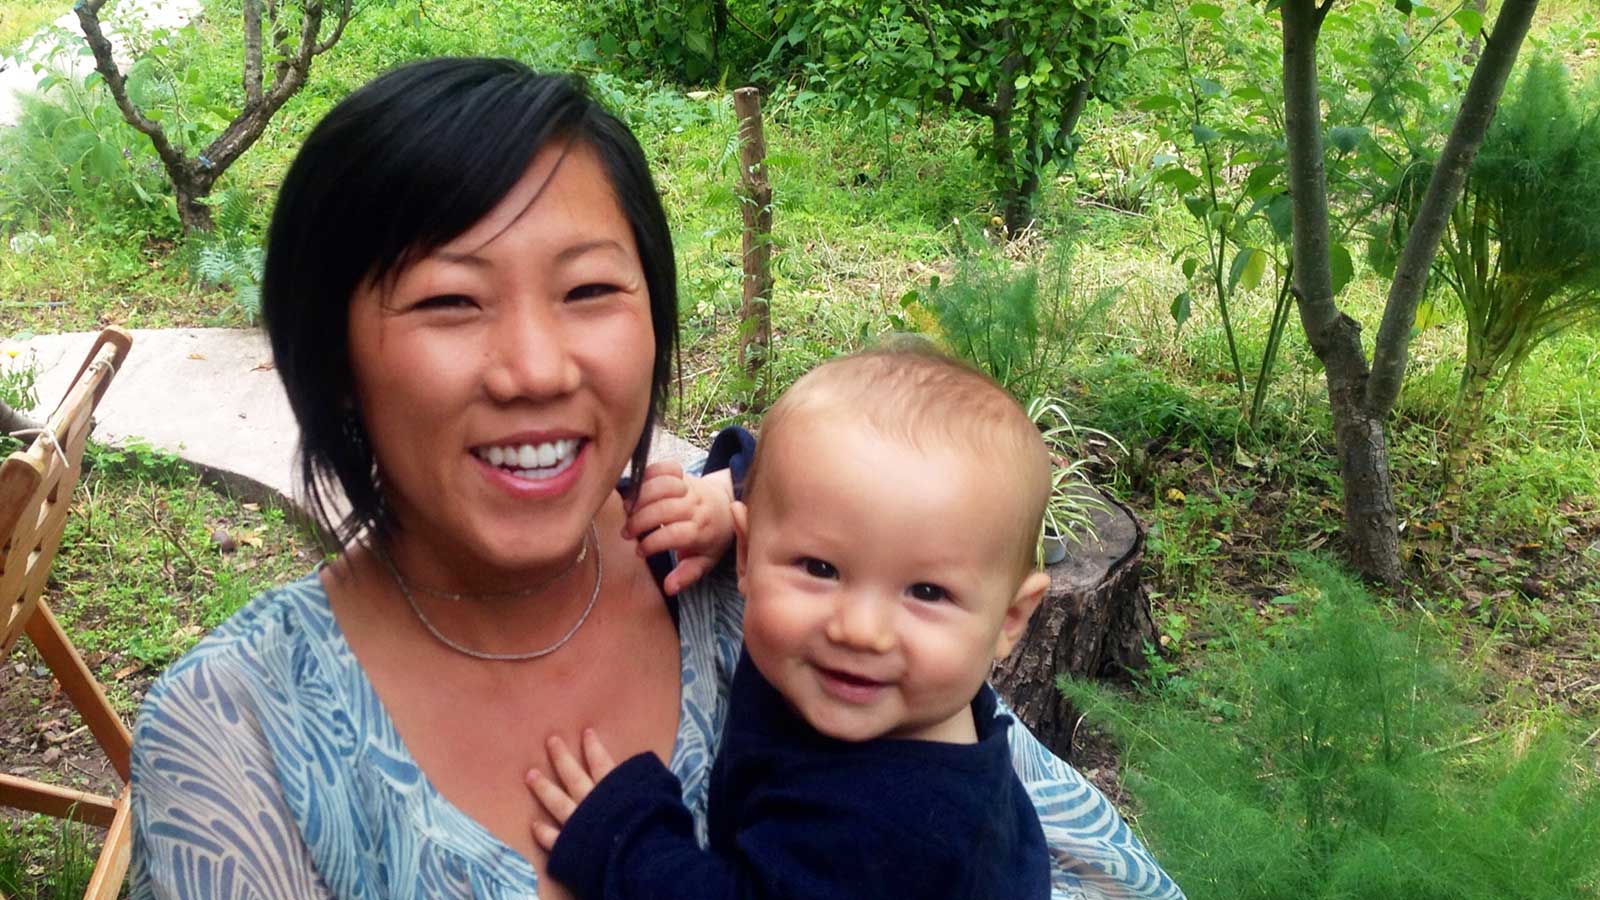 megan holds her baby shares adoptee's perspective on motherhood